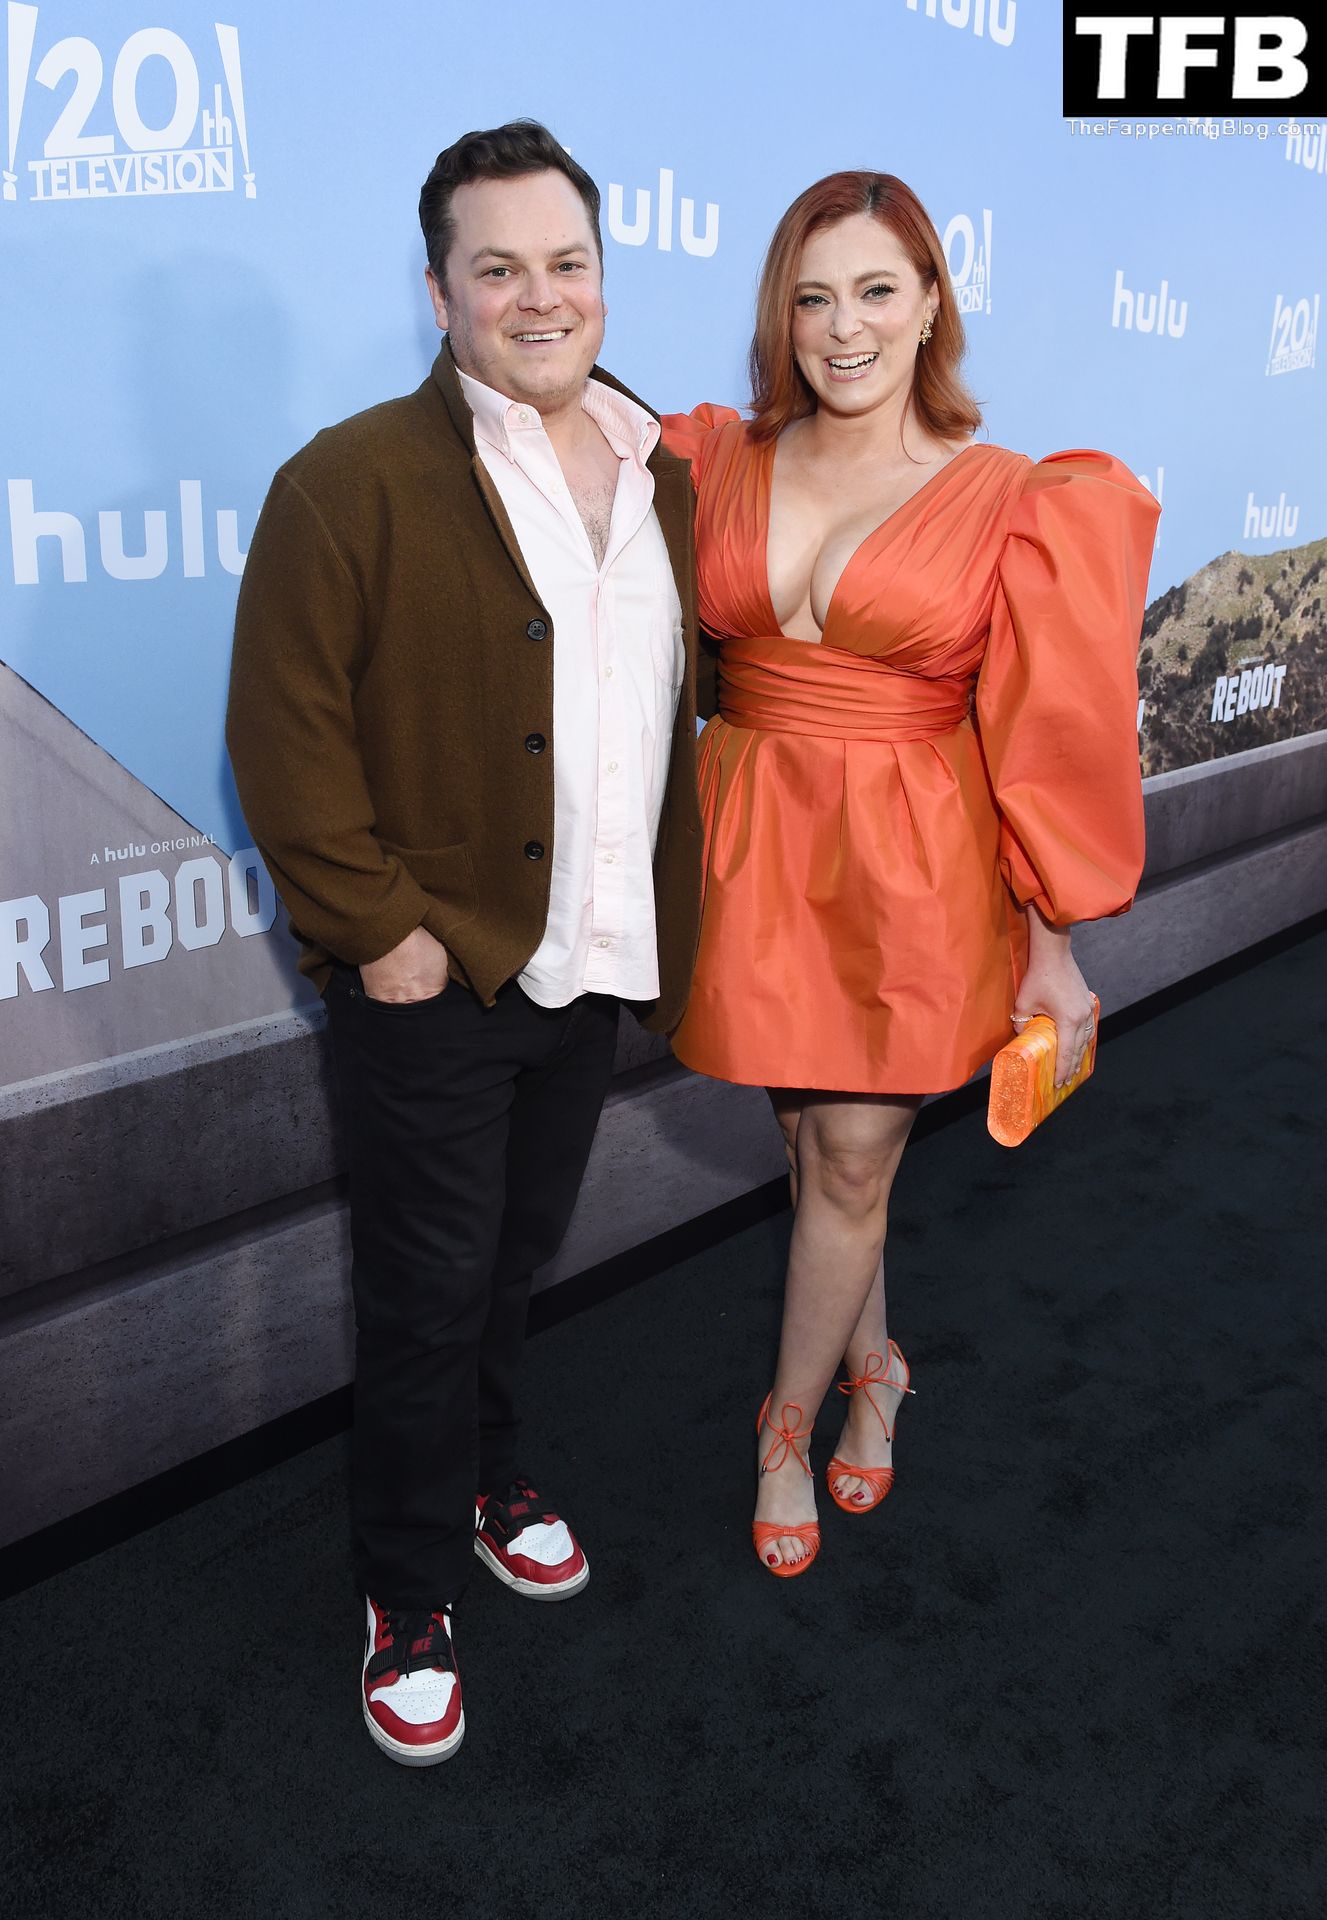 Rachel Bloom Sexy The Fappening Blog 13 - Rachel Bloom Displays Her Sexy Tits at the “Reboot” Premiere in LA (33 Photos)